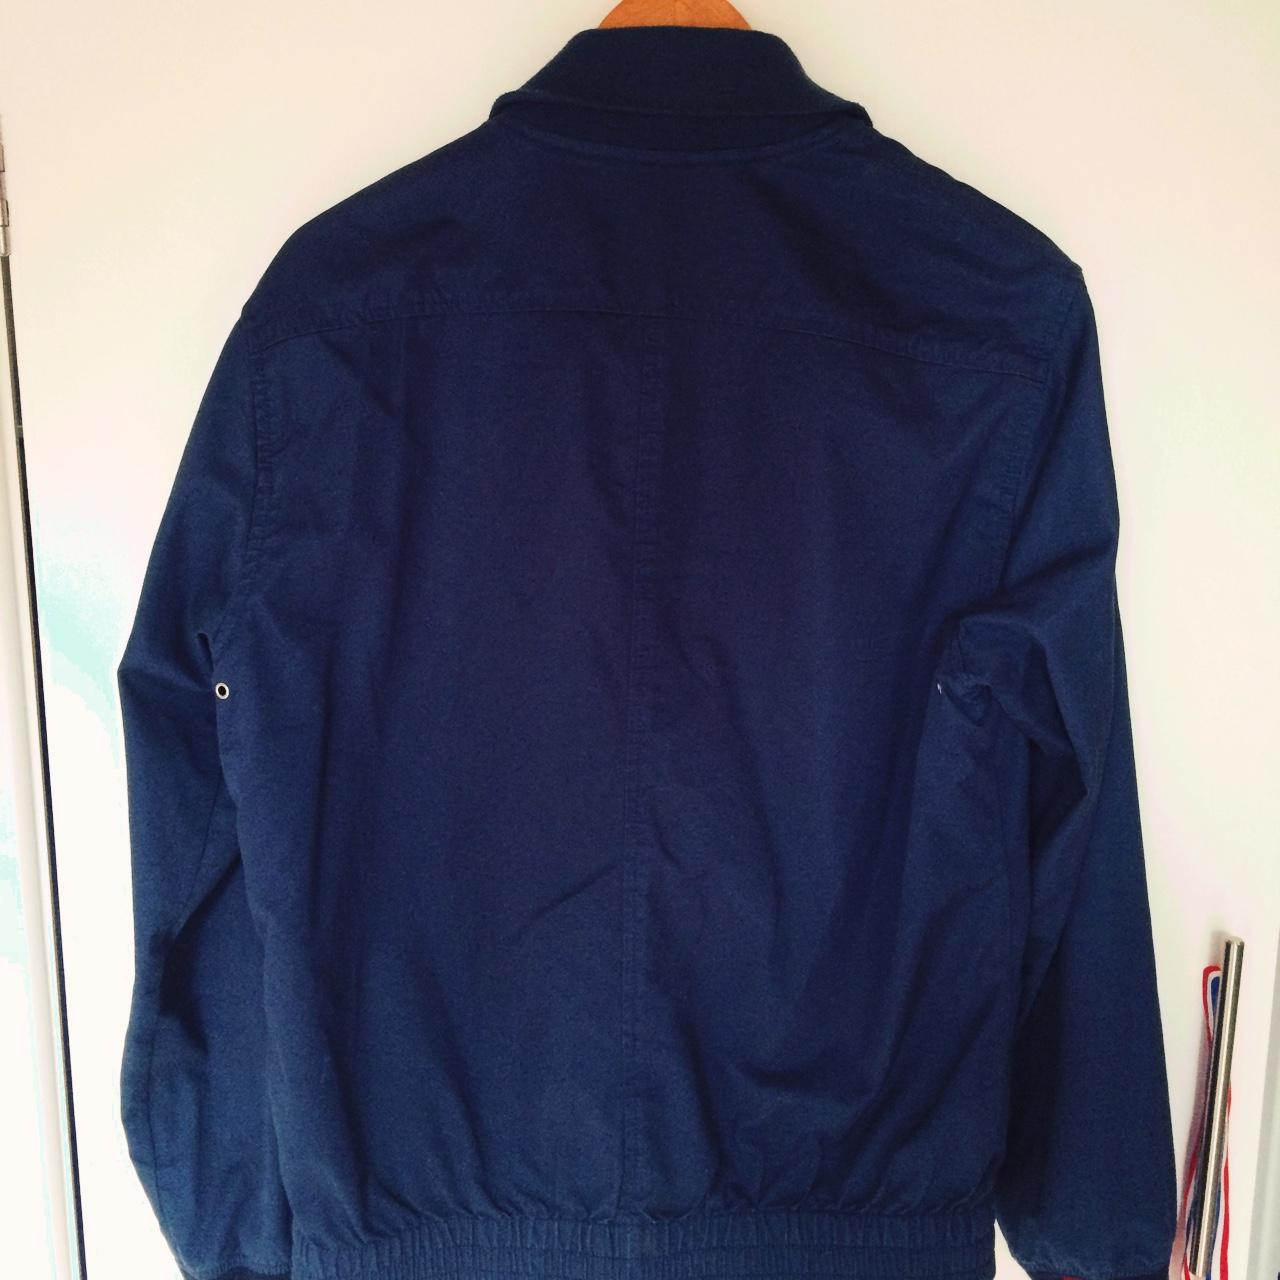 Fred Perry navy Harrington/Bomber kind of jacket in... - Depop